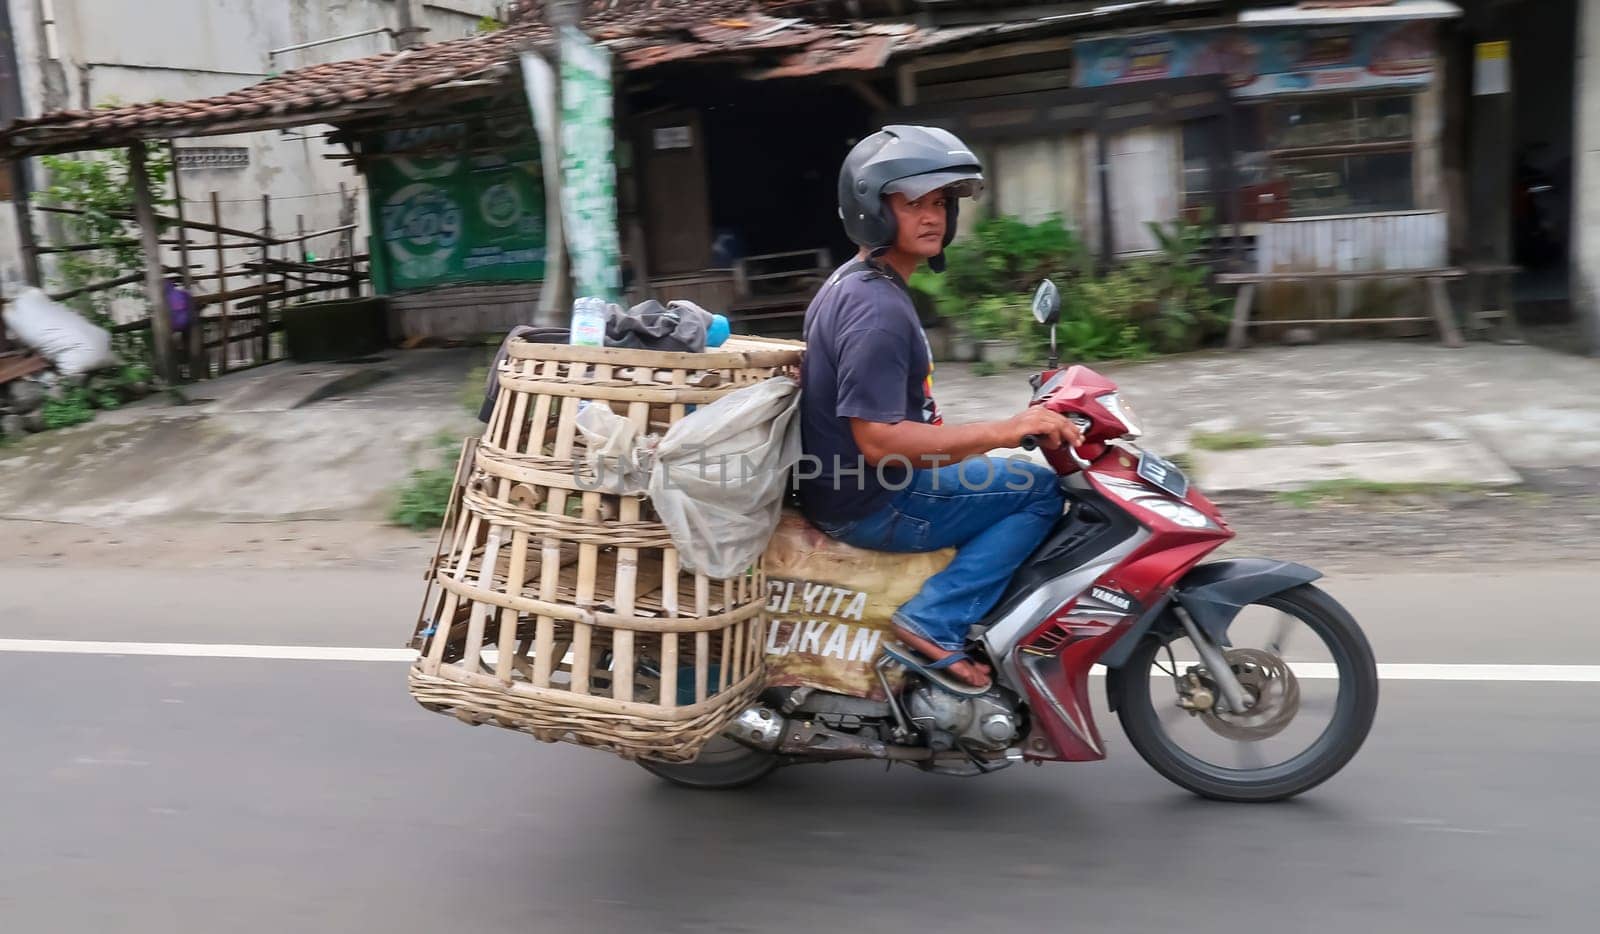 motorbike riding in asia as one of goods transportation method, being used to transport many kind of goods intercity by antoksena